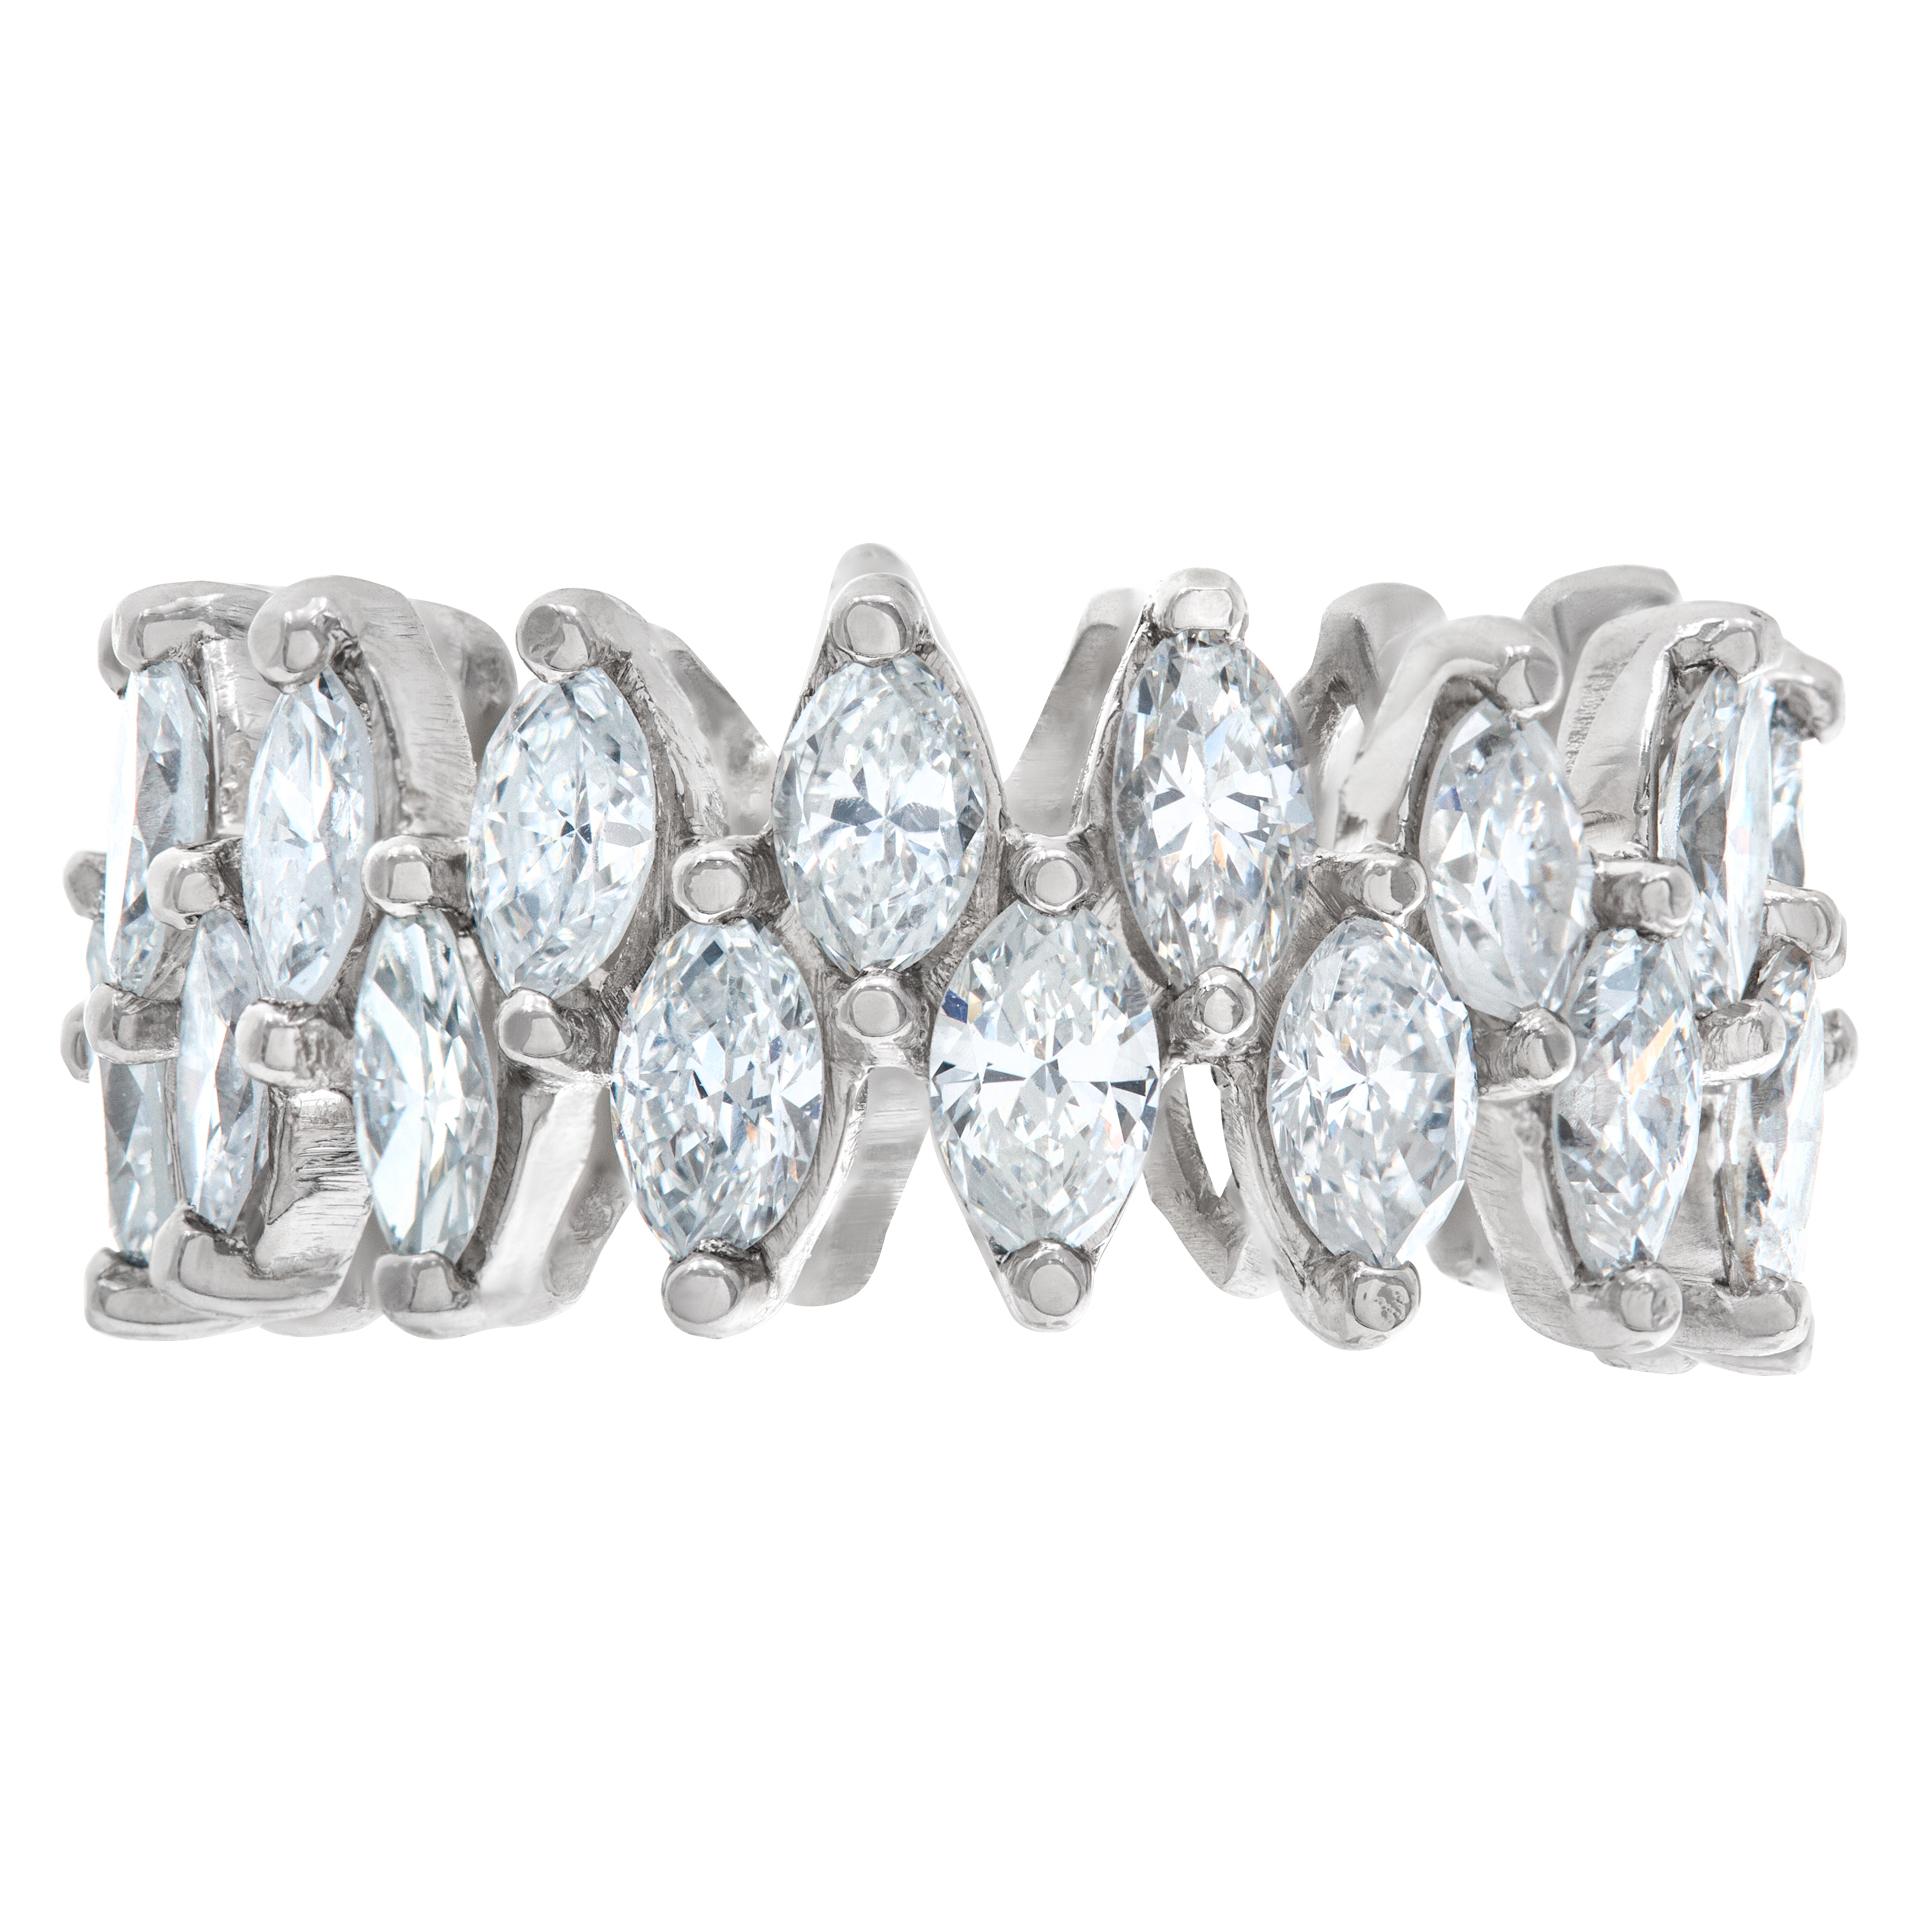 Diamond eternity band with marquise cut diamonds with approximately 4 carats in H-I color, VS2 clarity diamonds set in platinum. Size 6
